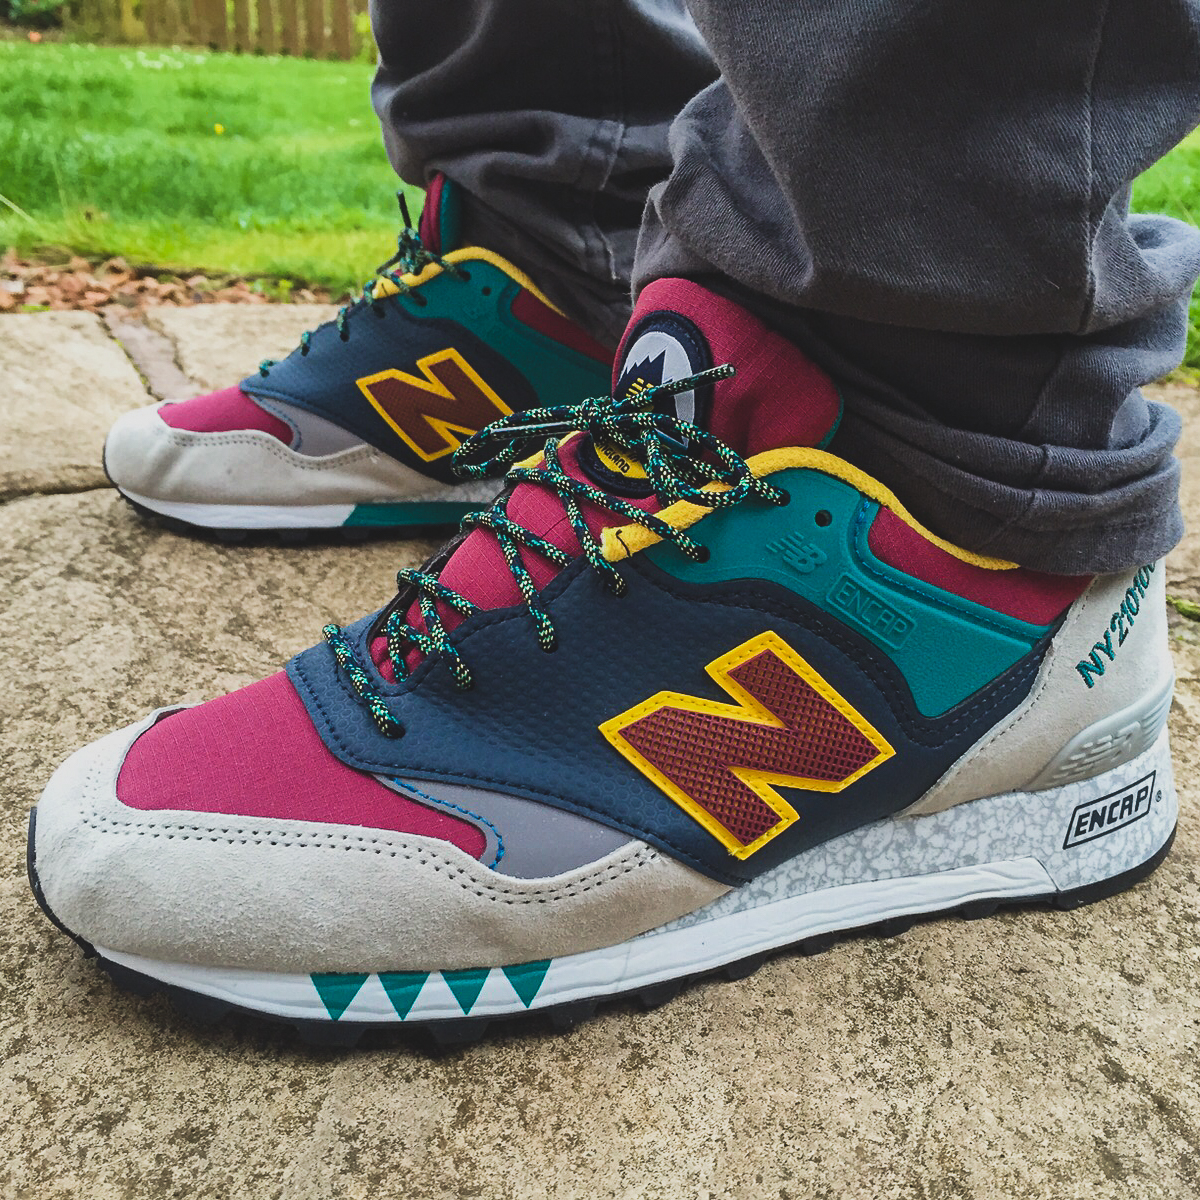 New Balance 577 “The Napes” Pack | New Balance Gallery